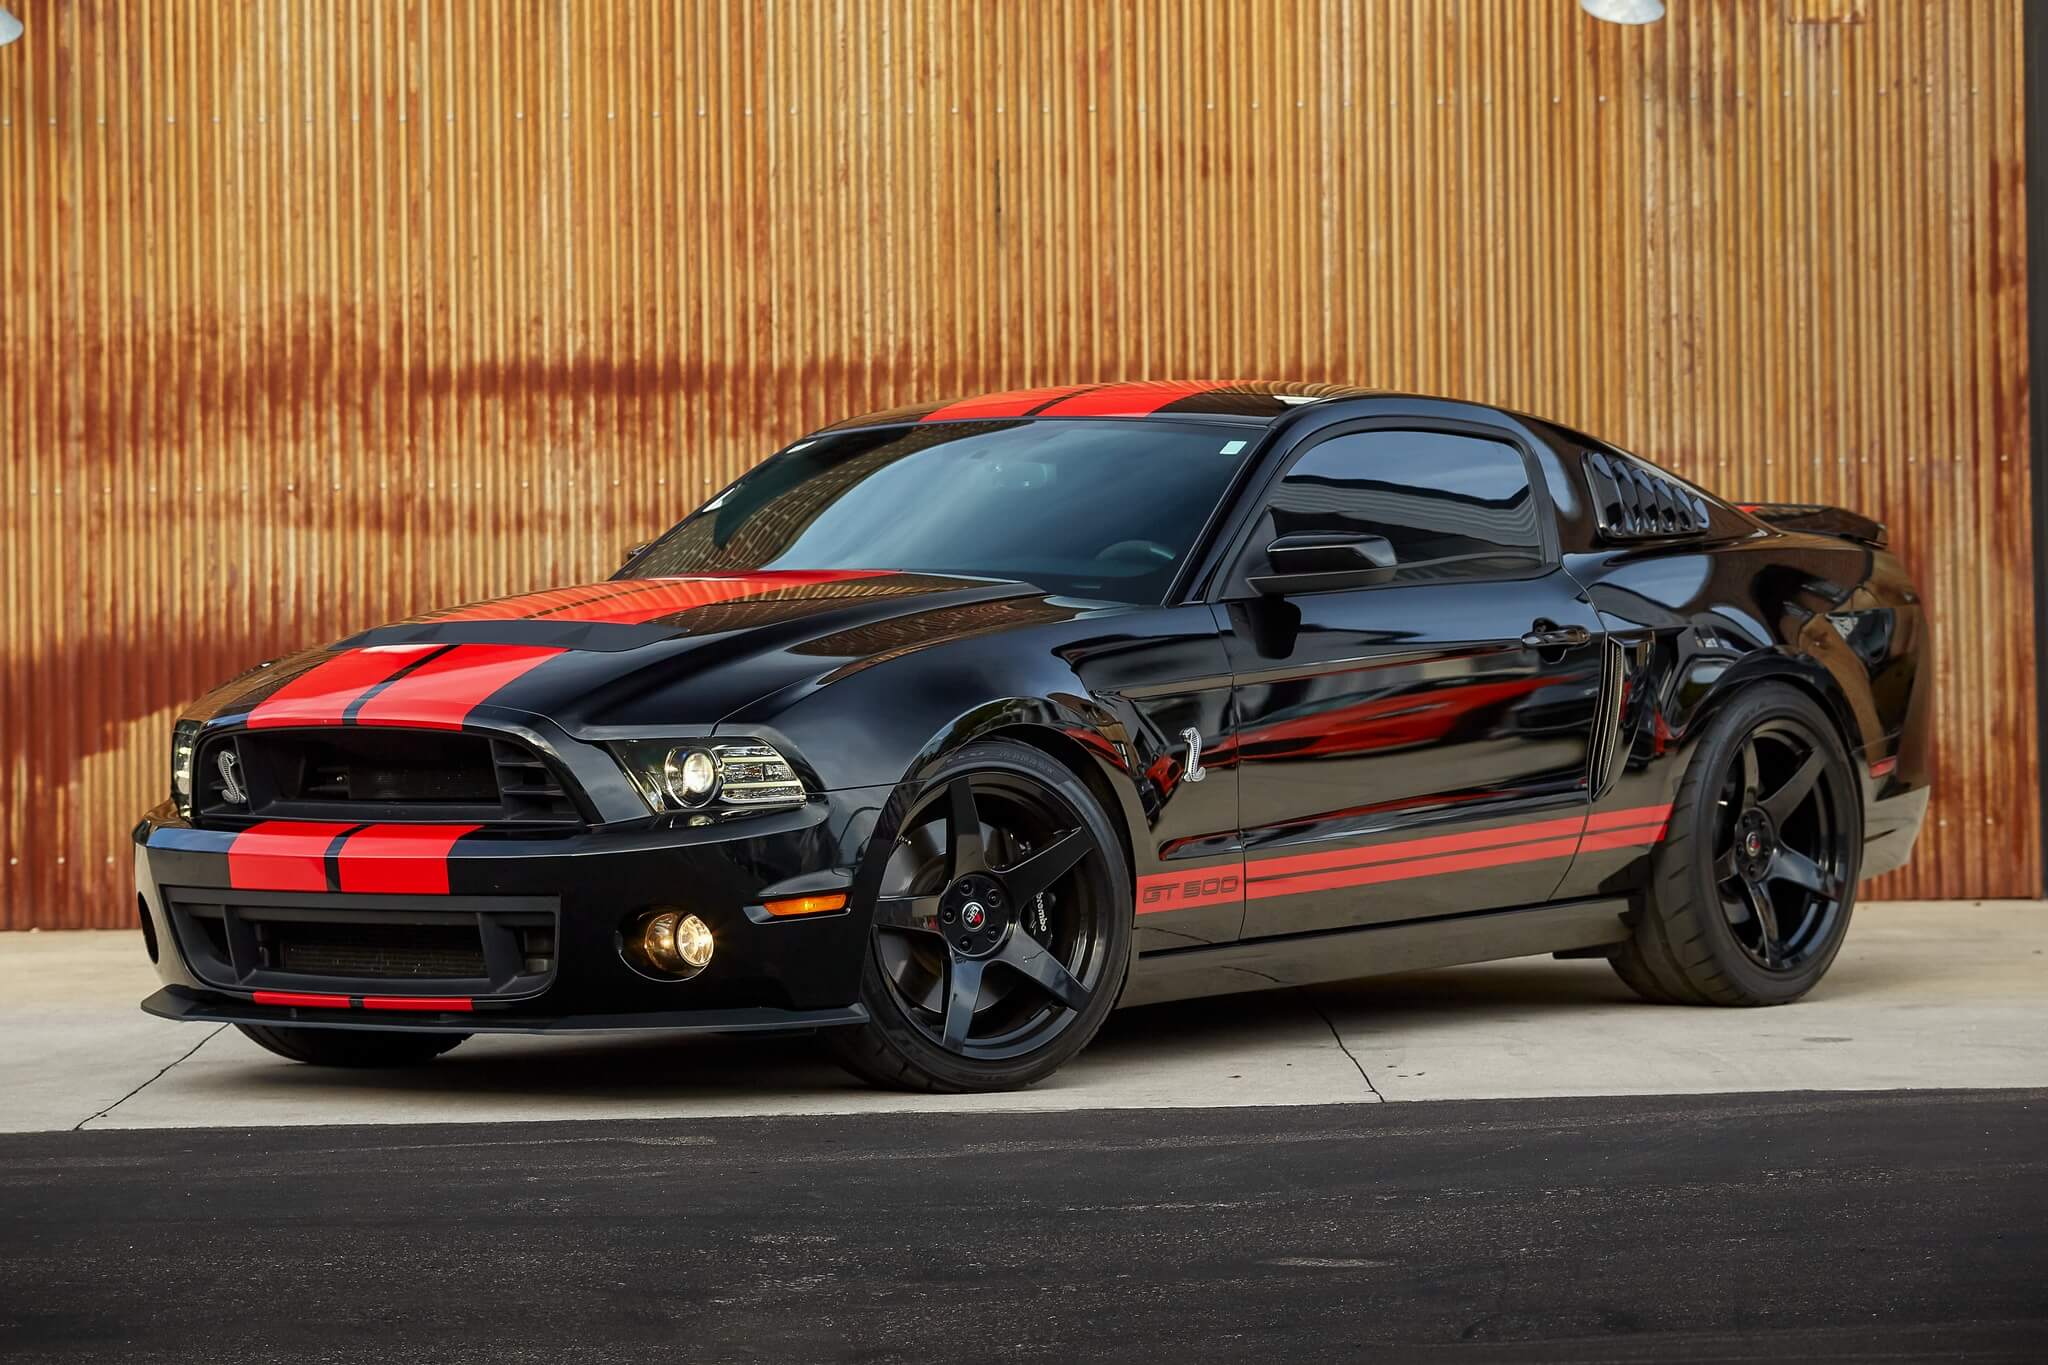 8k-Mile 2014 Ford Mustang Shelby GT500 6-Speed